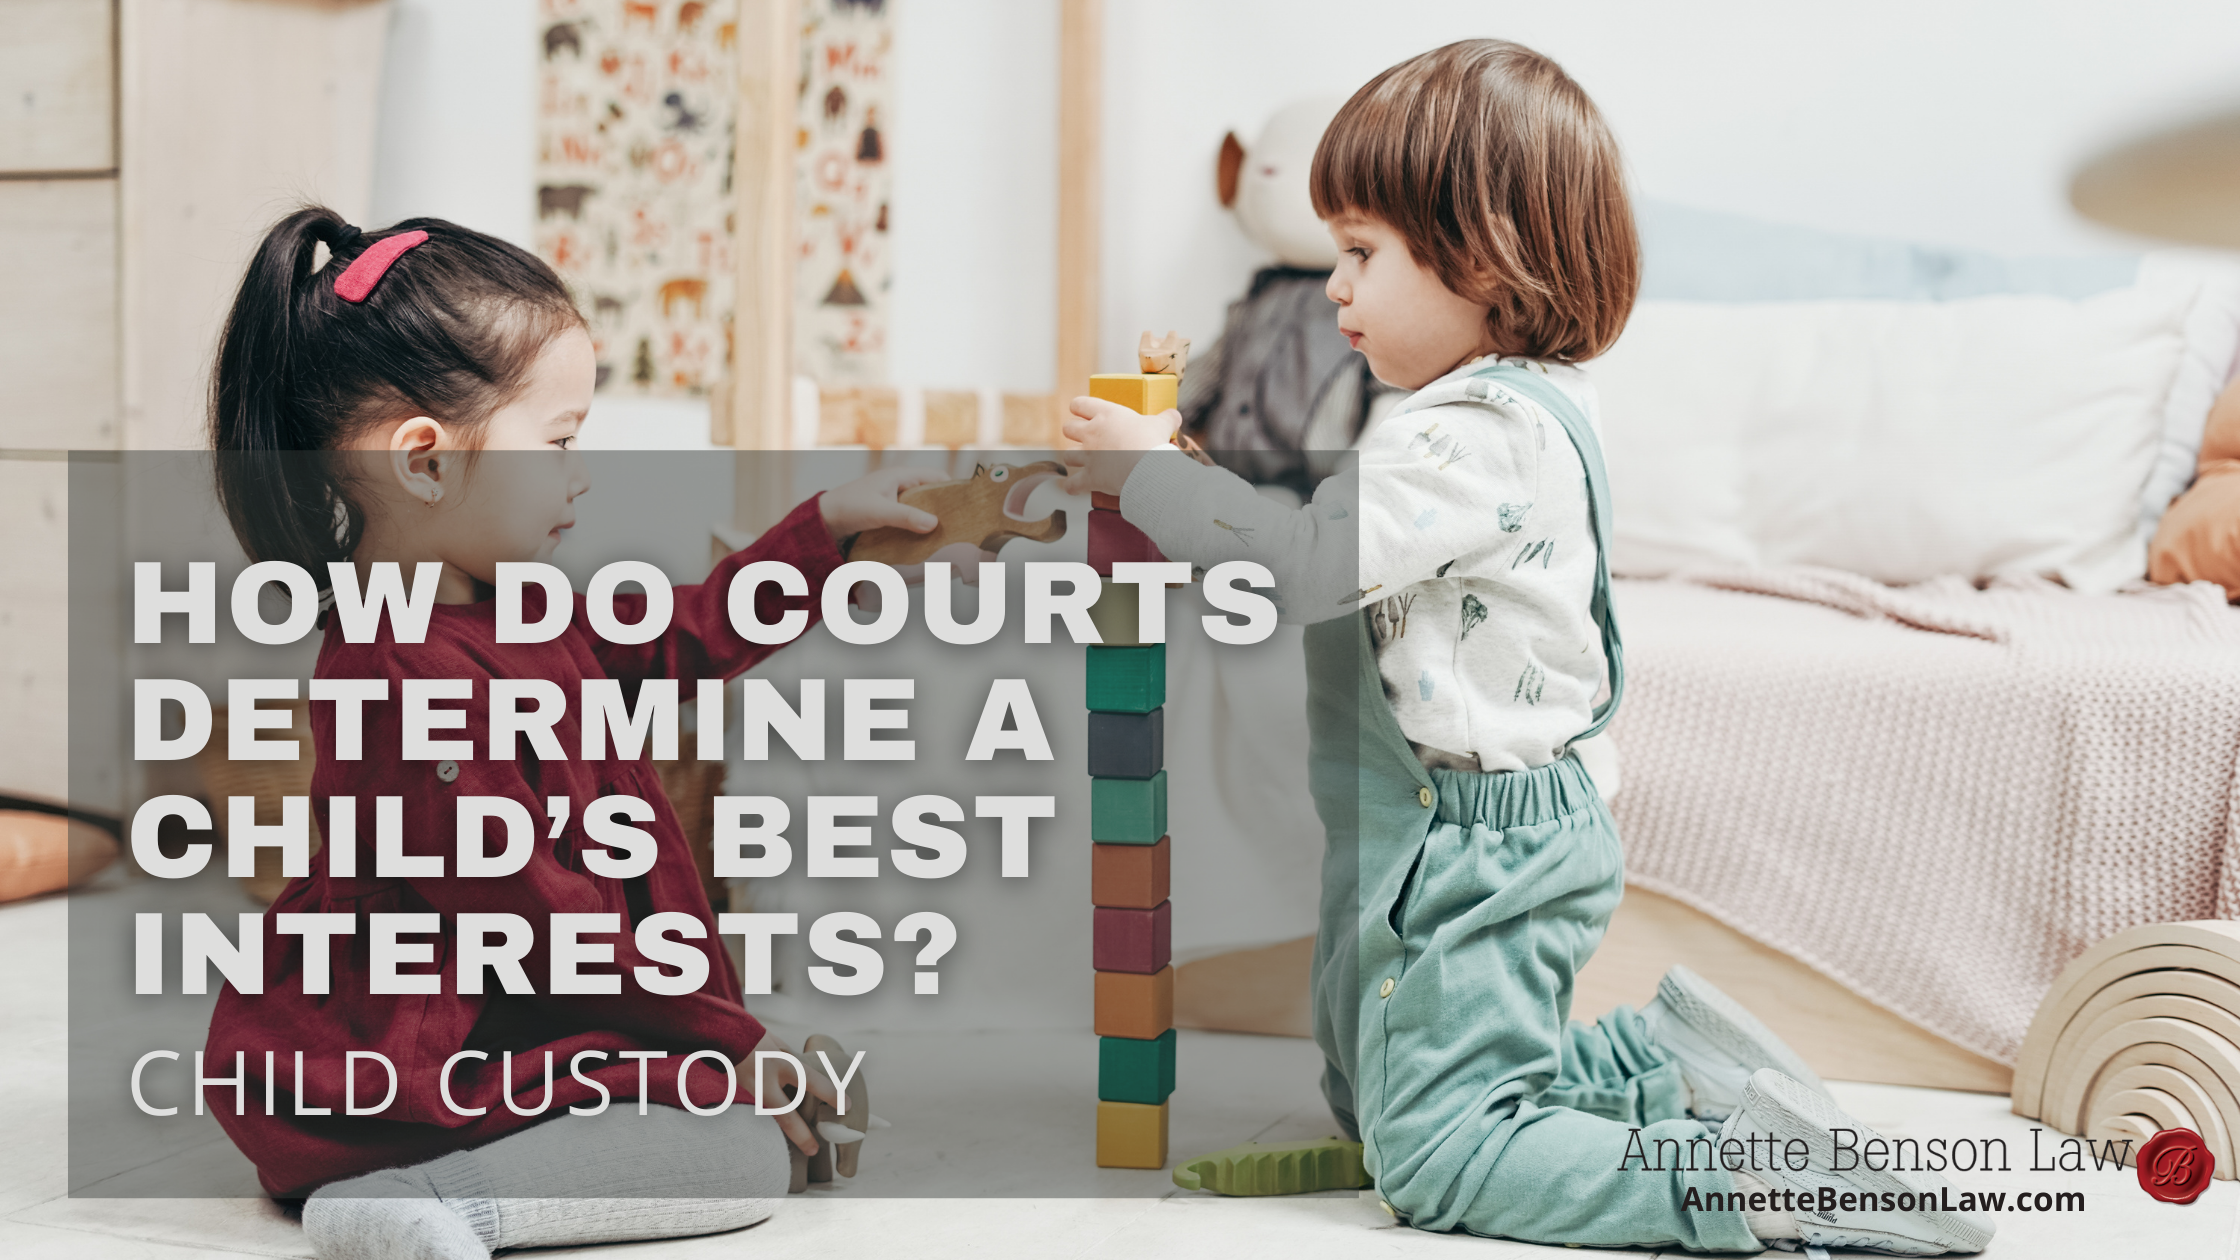 How do courts determine a child’s best interests?